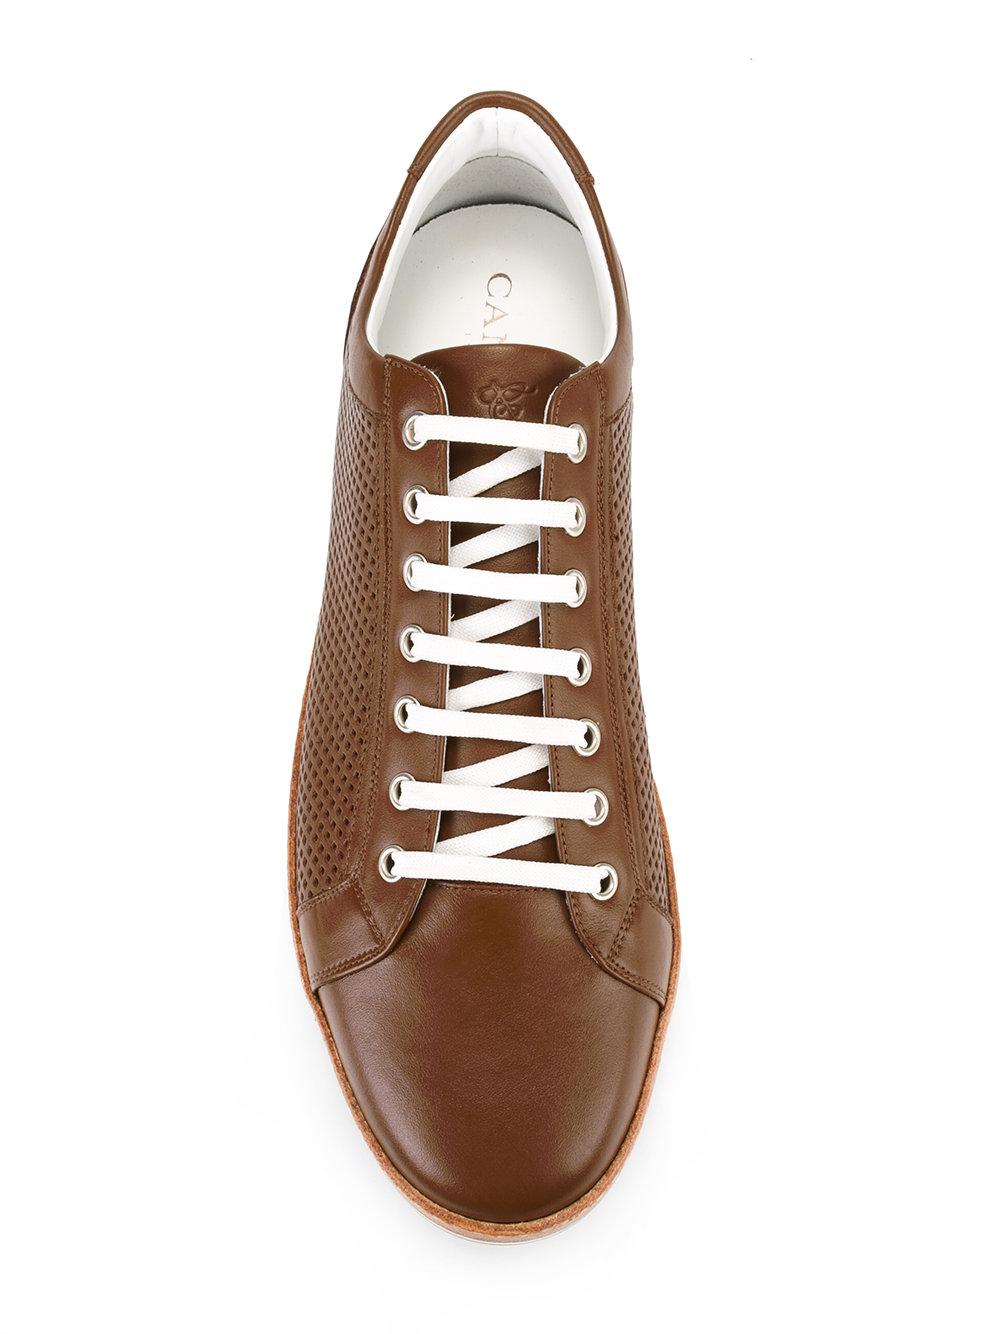 Canali Leather Perforated Sneakers in Brown for Men - Lyst